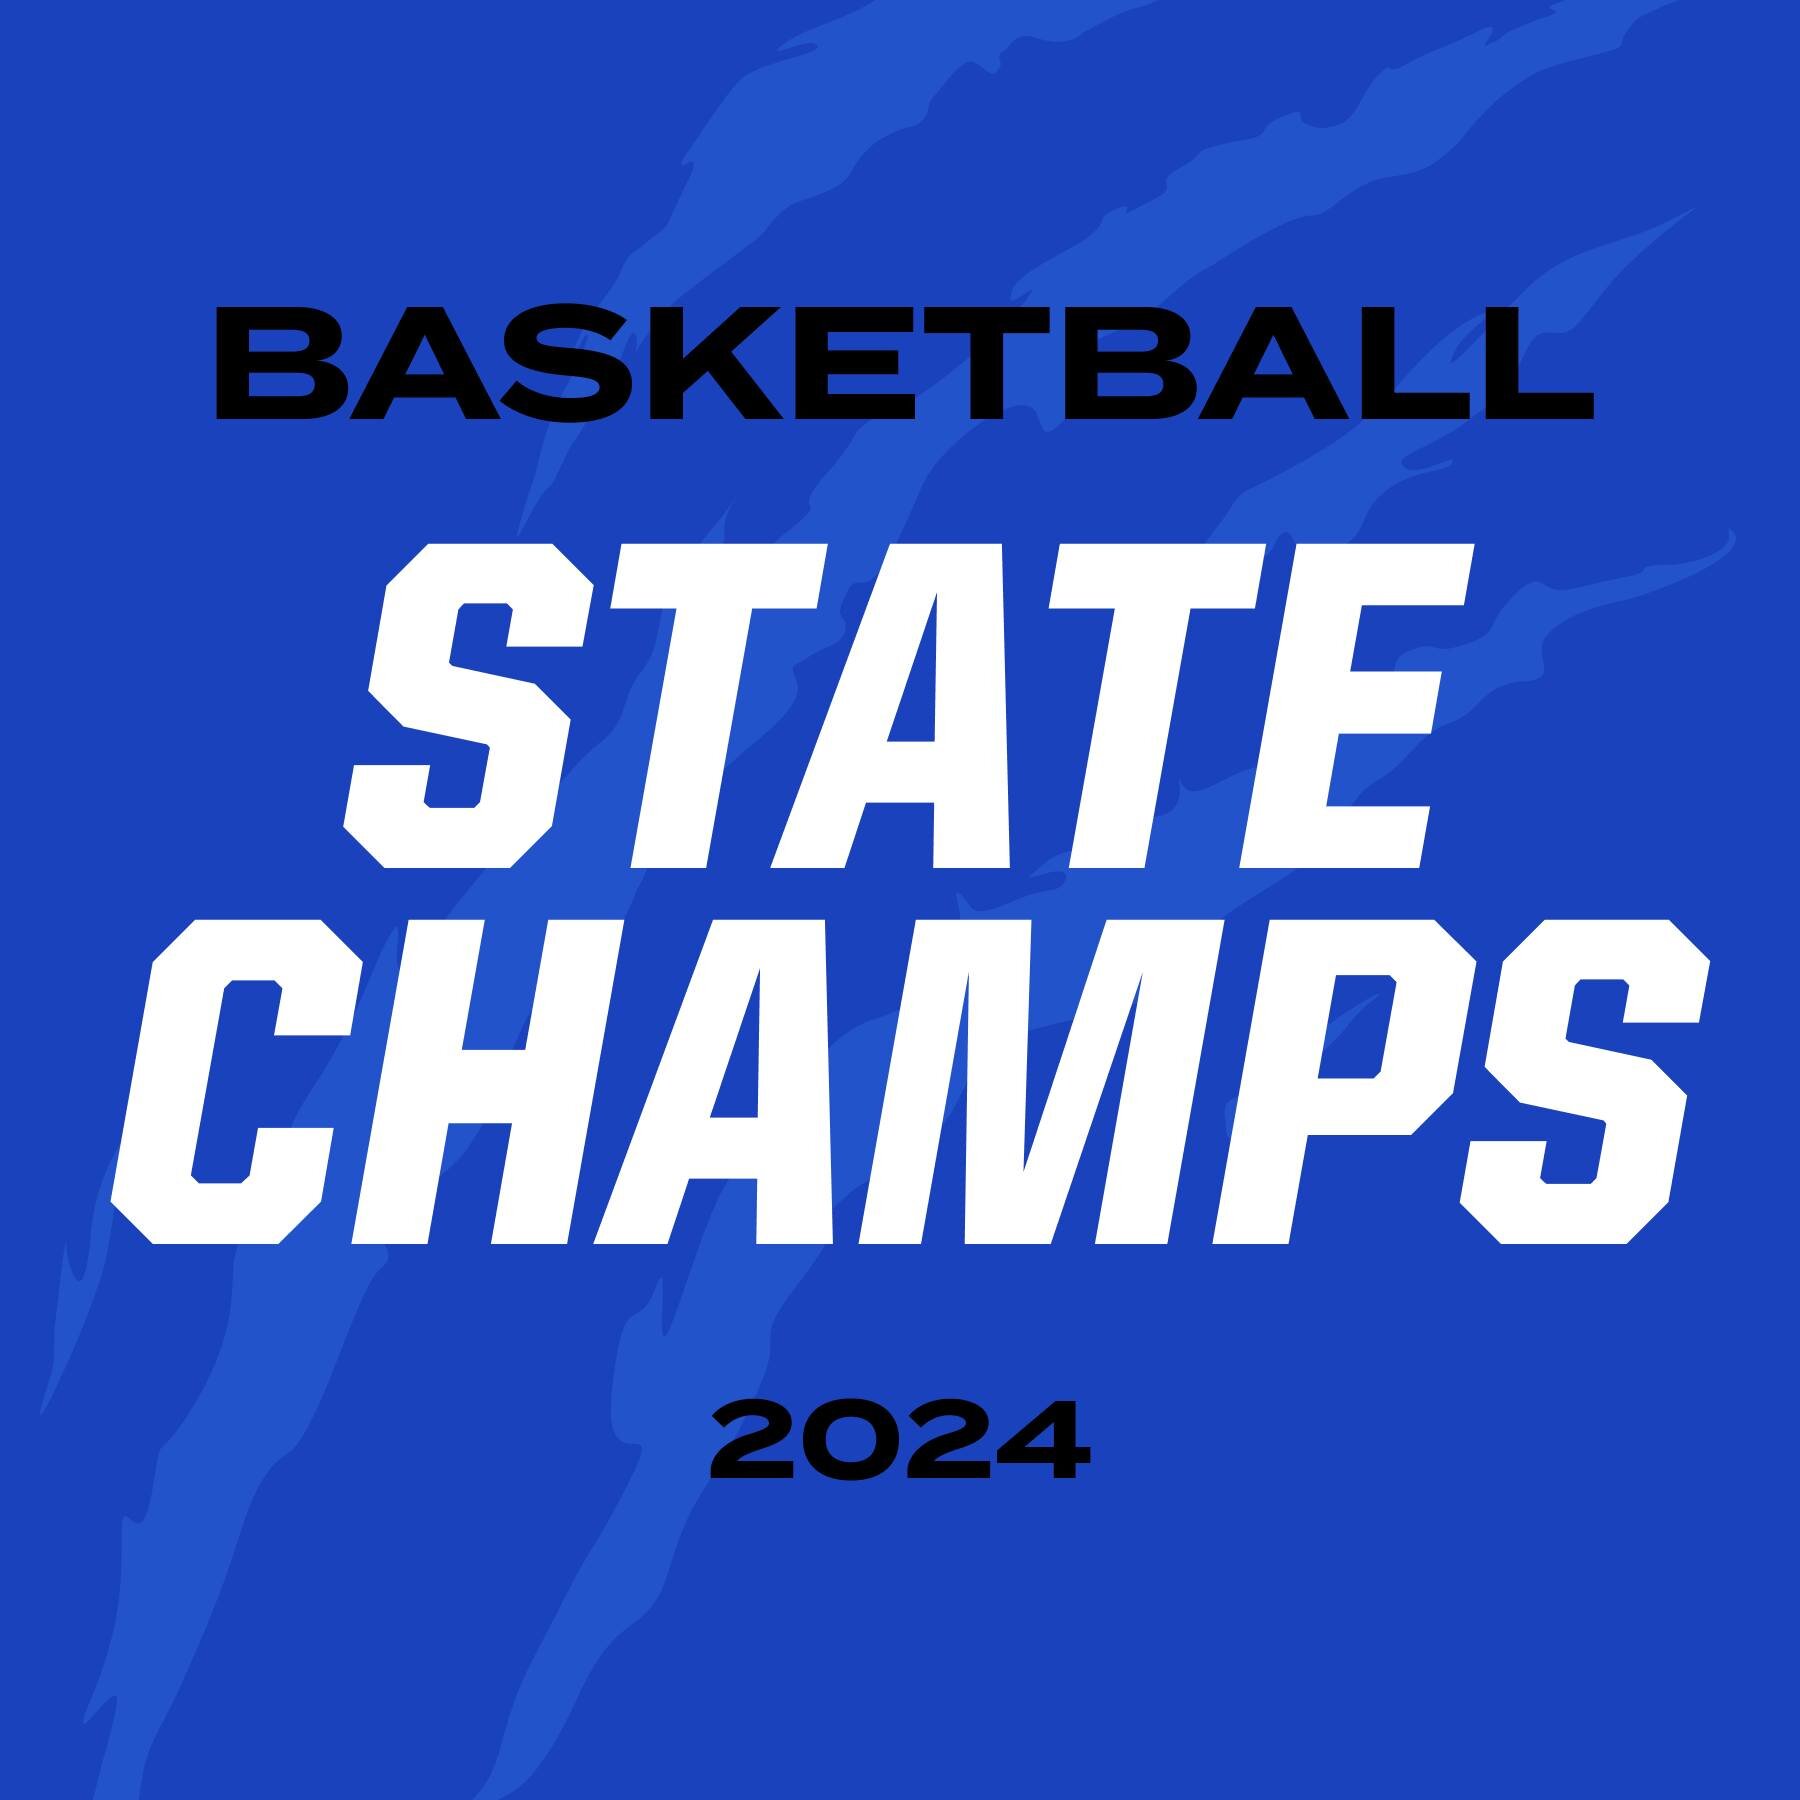 Now that we've all had a few days to catch our breath &hellip; let's hear it for all of our teams that played in the State Championship Games over the weekend!

A special congratulations to our State Champion Teams:
Boys Varsity
Girls Junior Varsity
